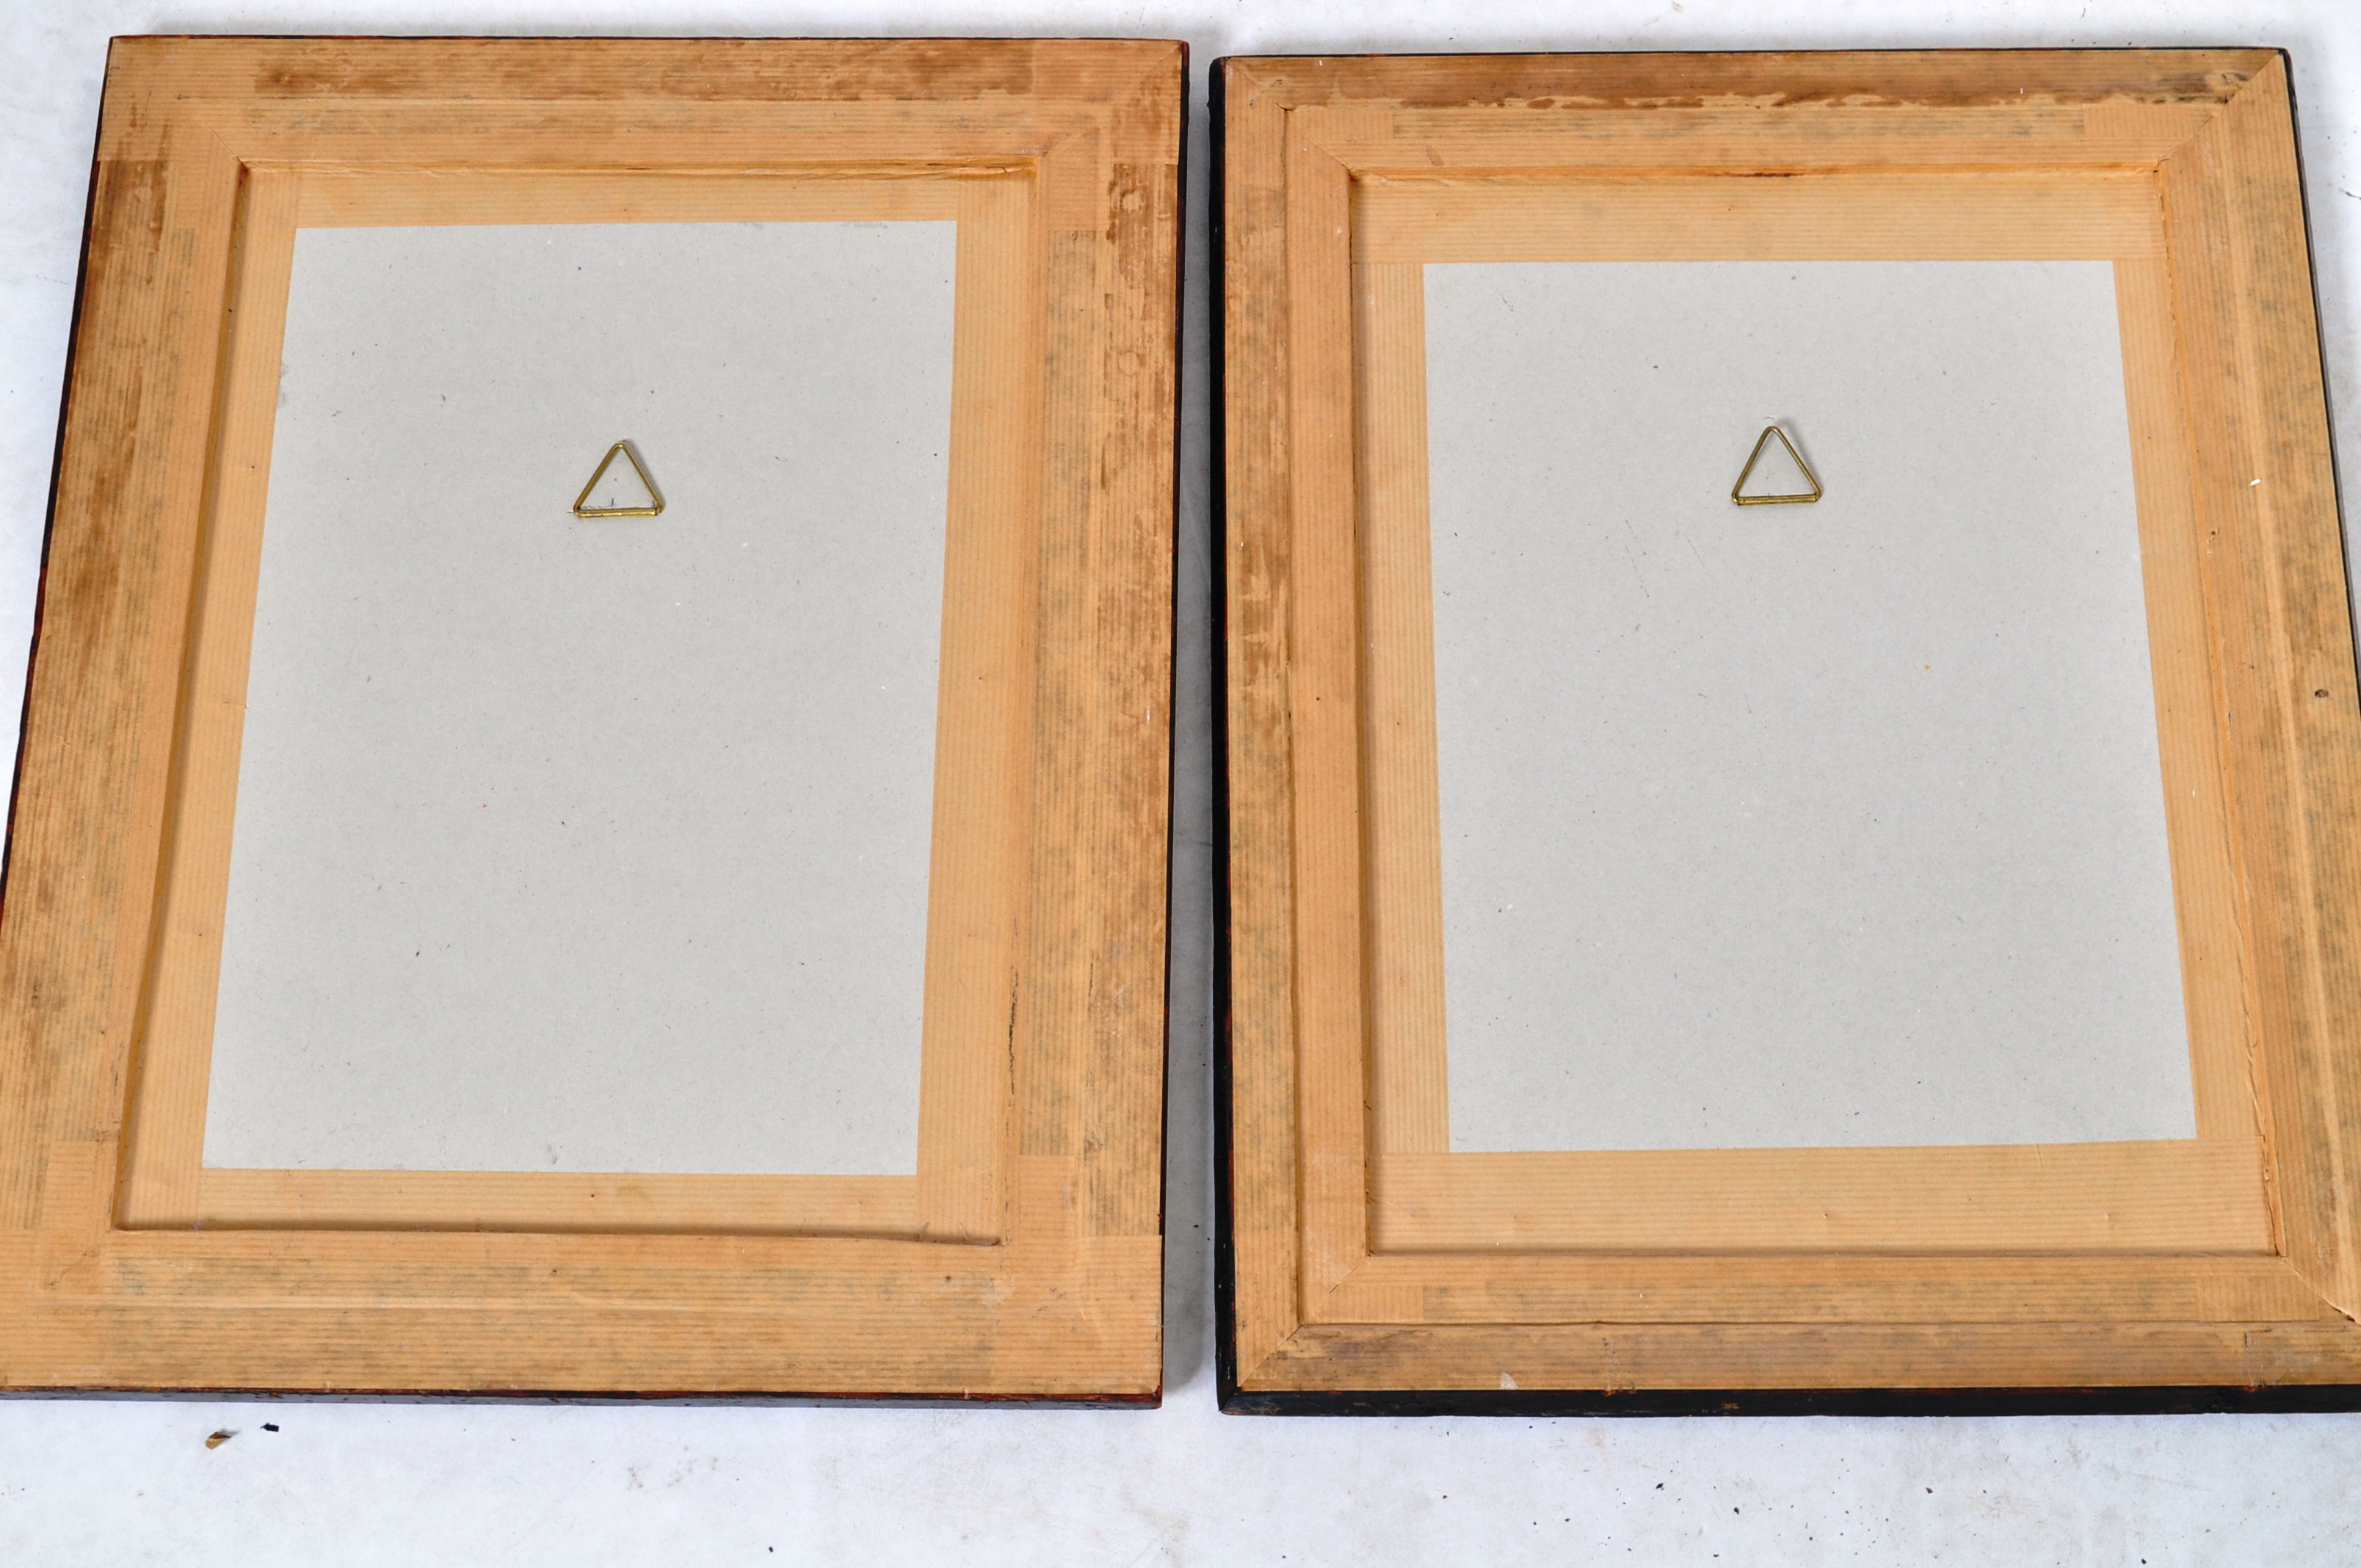 PAIR OF ANTIQUE 18TH CENTURY GEORGIAN REVERSE PRINTED GLASS PICTURES - Image 7 of 7